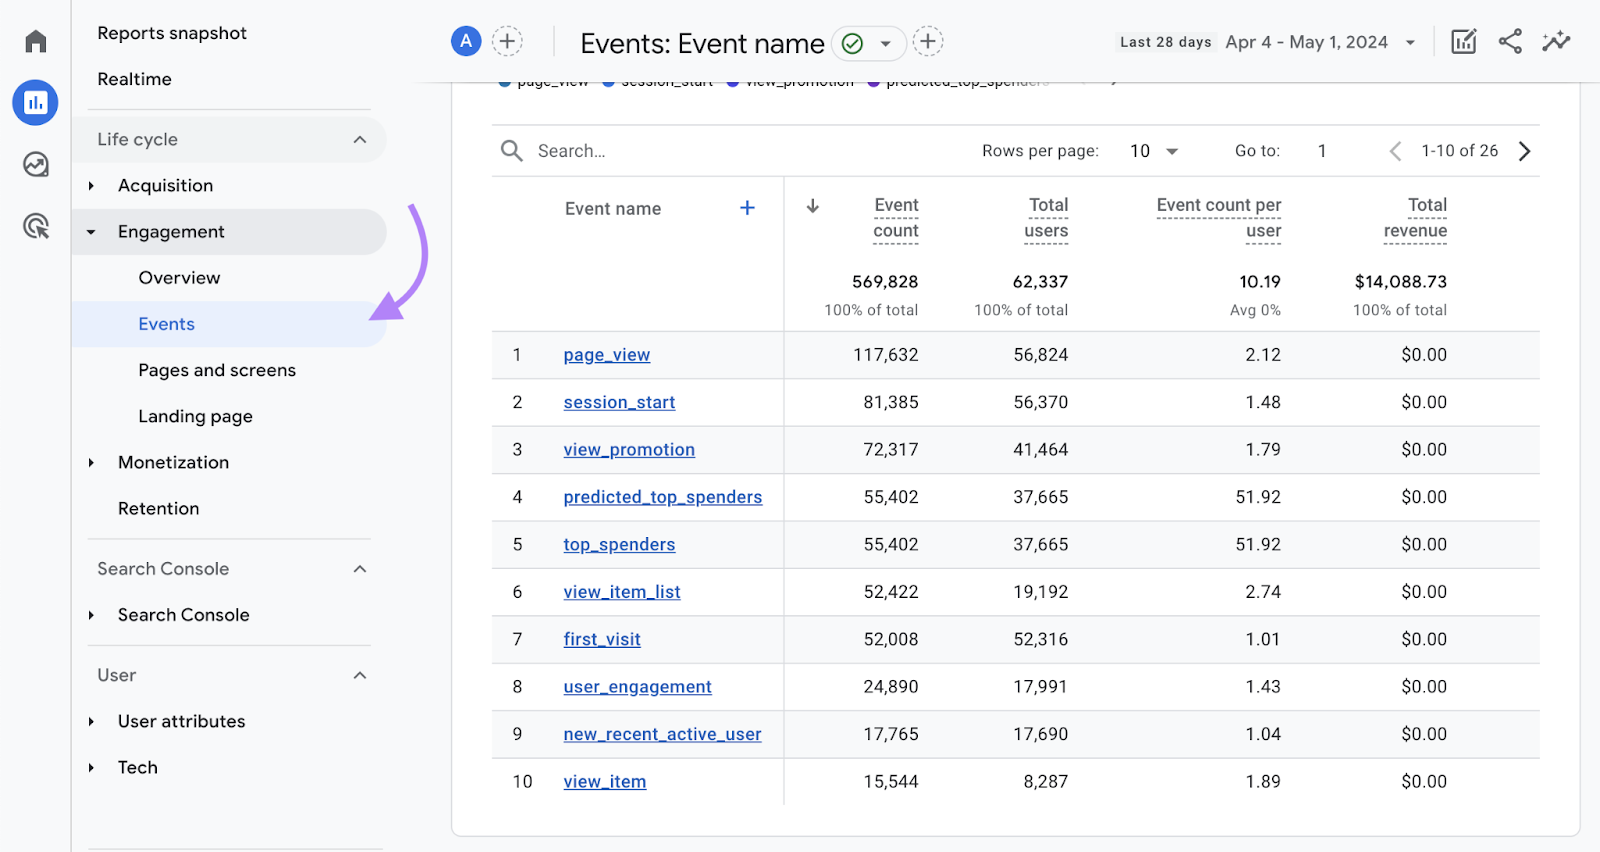 google analytics navigation to the Events report showing user events and their revenue impact